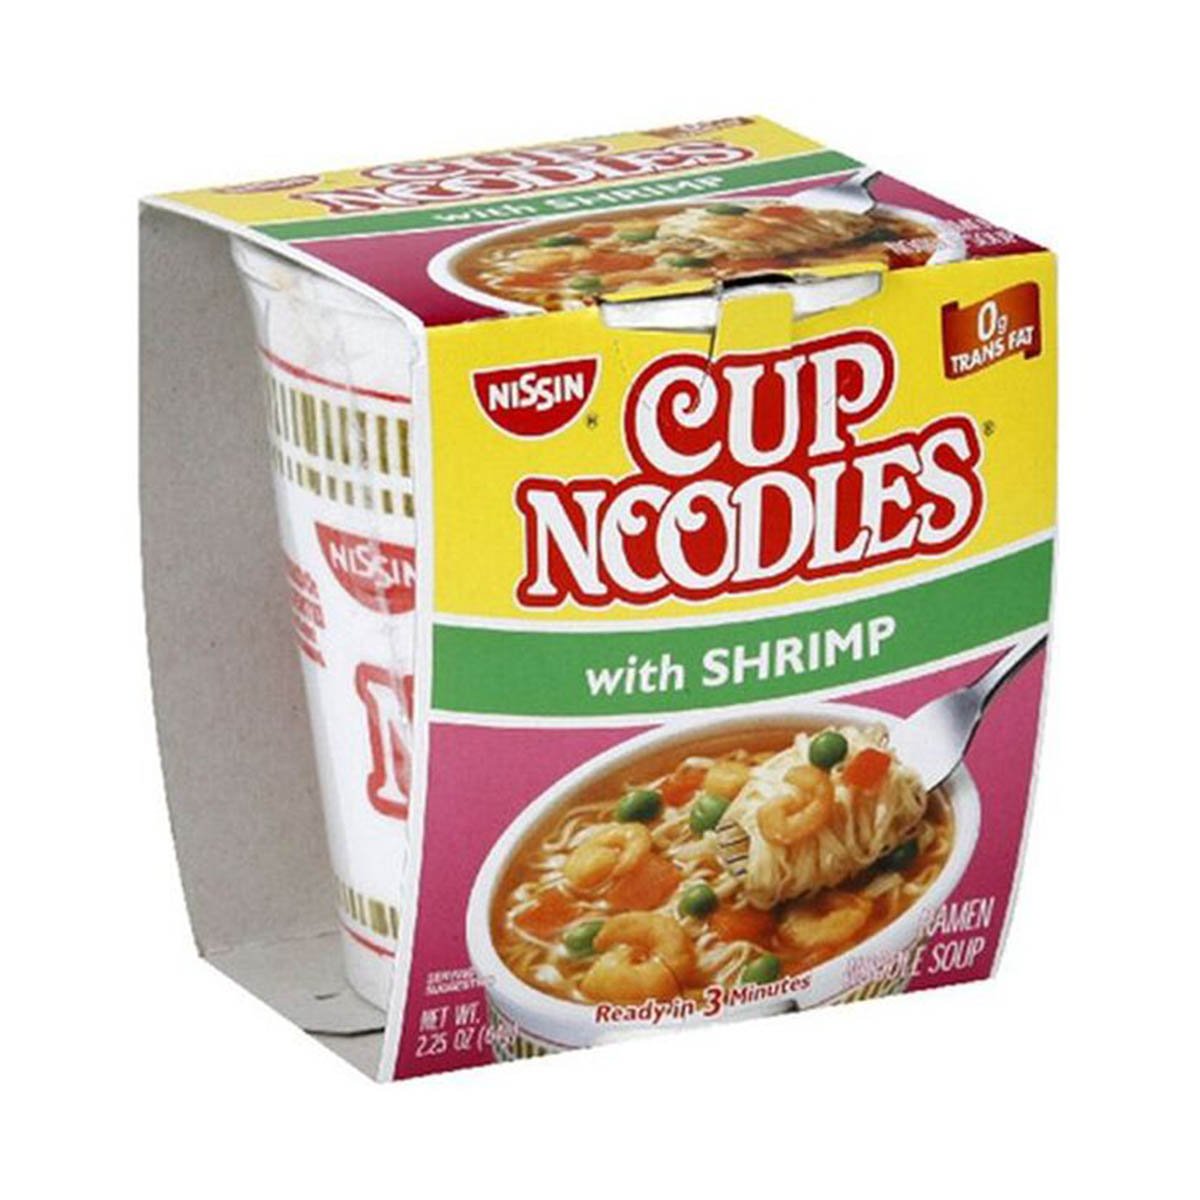 Cup лапша. Nissin Cup Noodles. Nissin foods лапша. Nissin Cup Noodles с креветками. Лапша Cup Noodles курица спайси Чили.